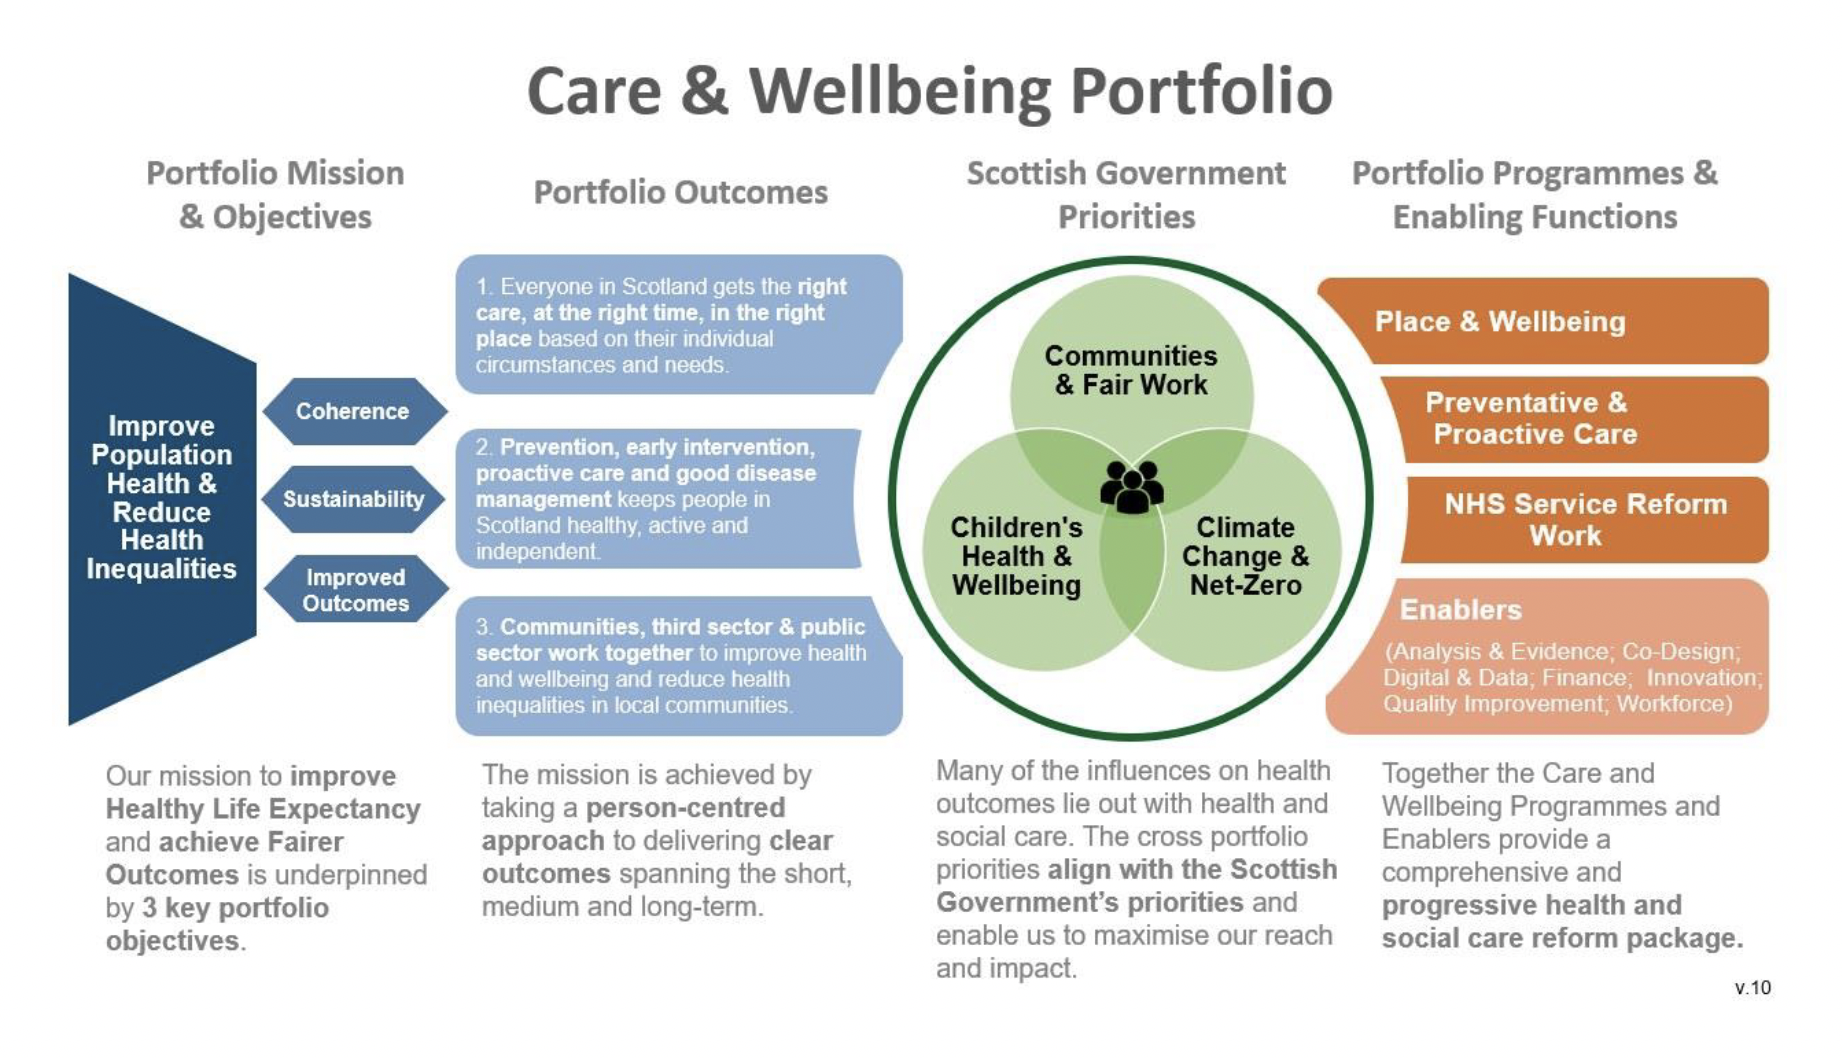 This image denotes the Care and Wellbeing’s portfolio mission, objectives and outcomes in improving population health and reducing health inequalities, in line with Scottish Government priorities.